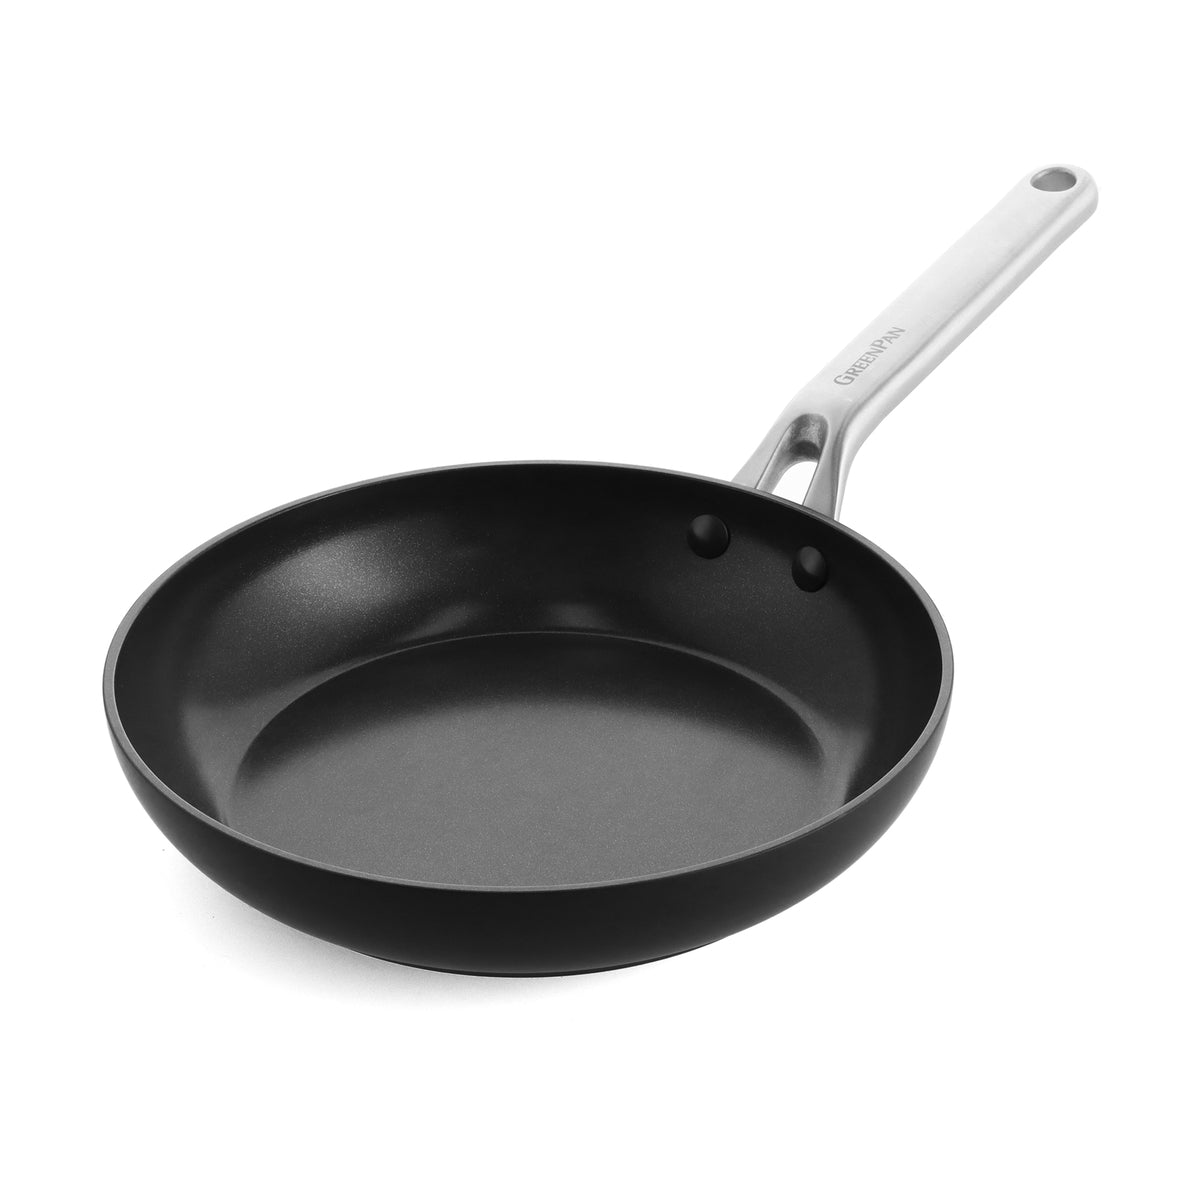 Otantik Non-Stick Frying Pan/ Professional Ceramic Nonstick - Ceramic  Marble Coating - Cool Handles - PTFE & PFOA Free - Compatible with All  Stovetops (Brown) (9.5 Inch) - Otantik Home USA